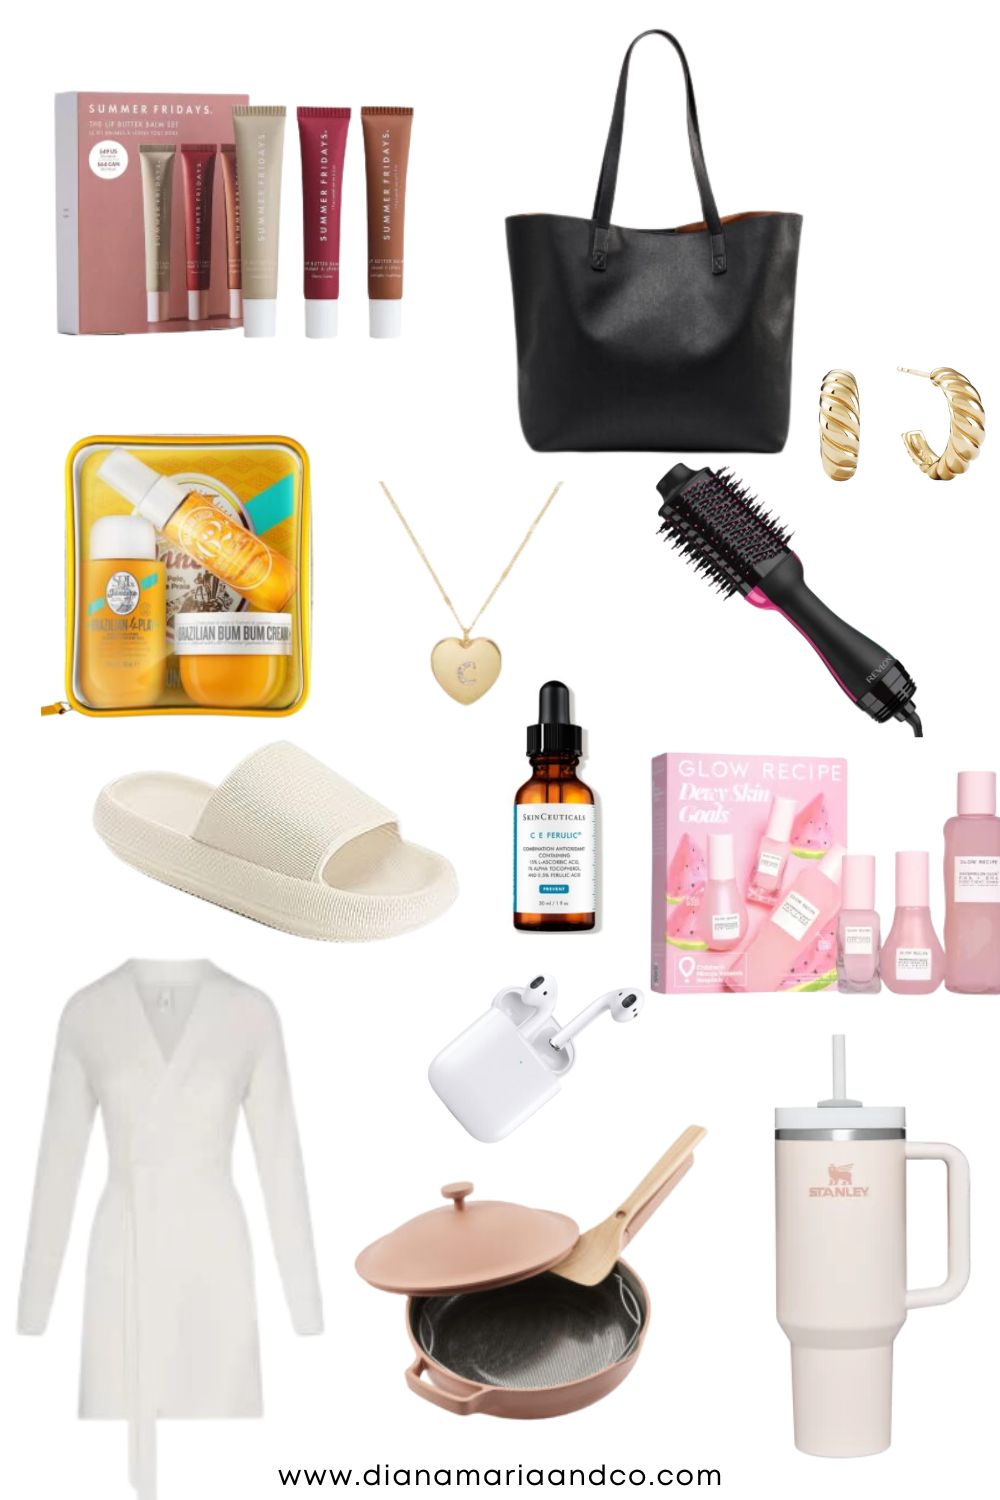 Best Christmas Gifts For Mom She Will Absolutely Love - Diana